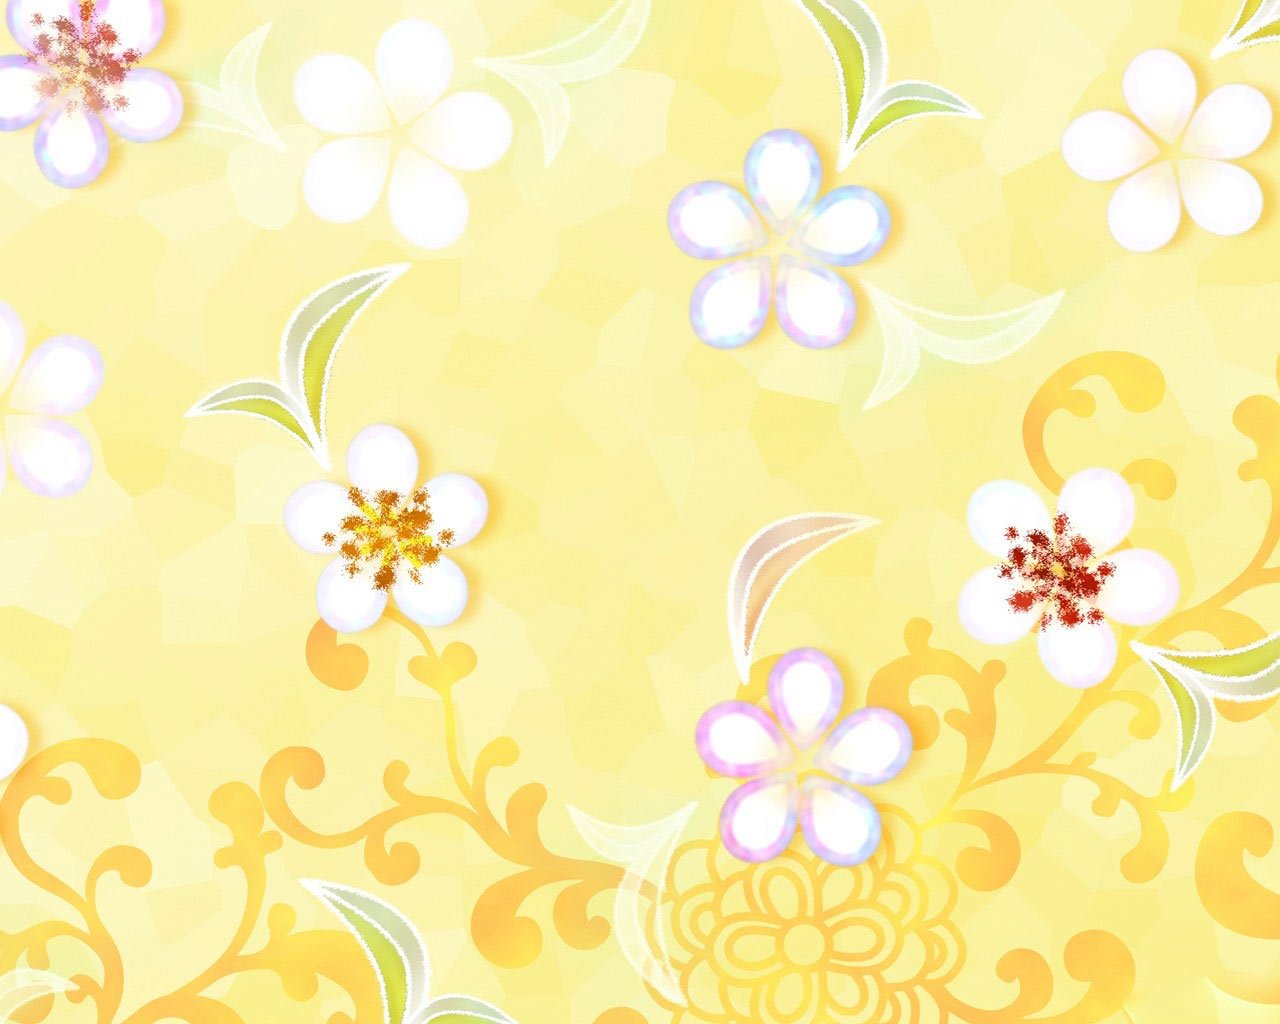  Spring flowers yellow background hd Wallpaper and make this wallpaper 1280x1024